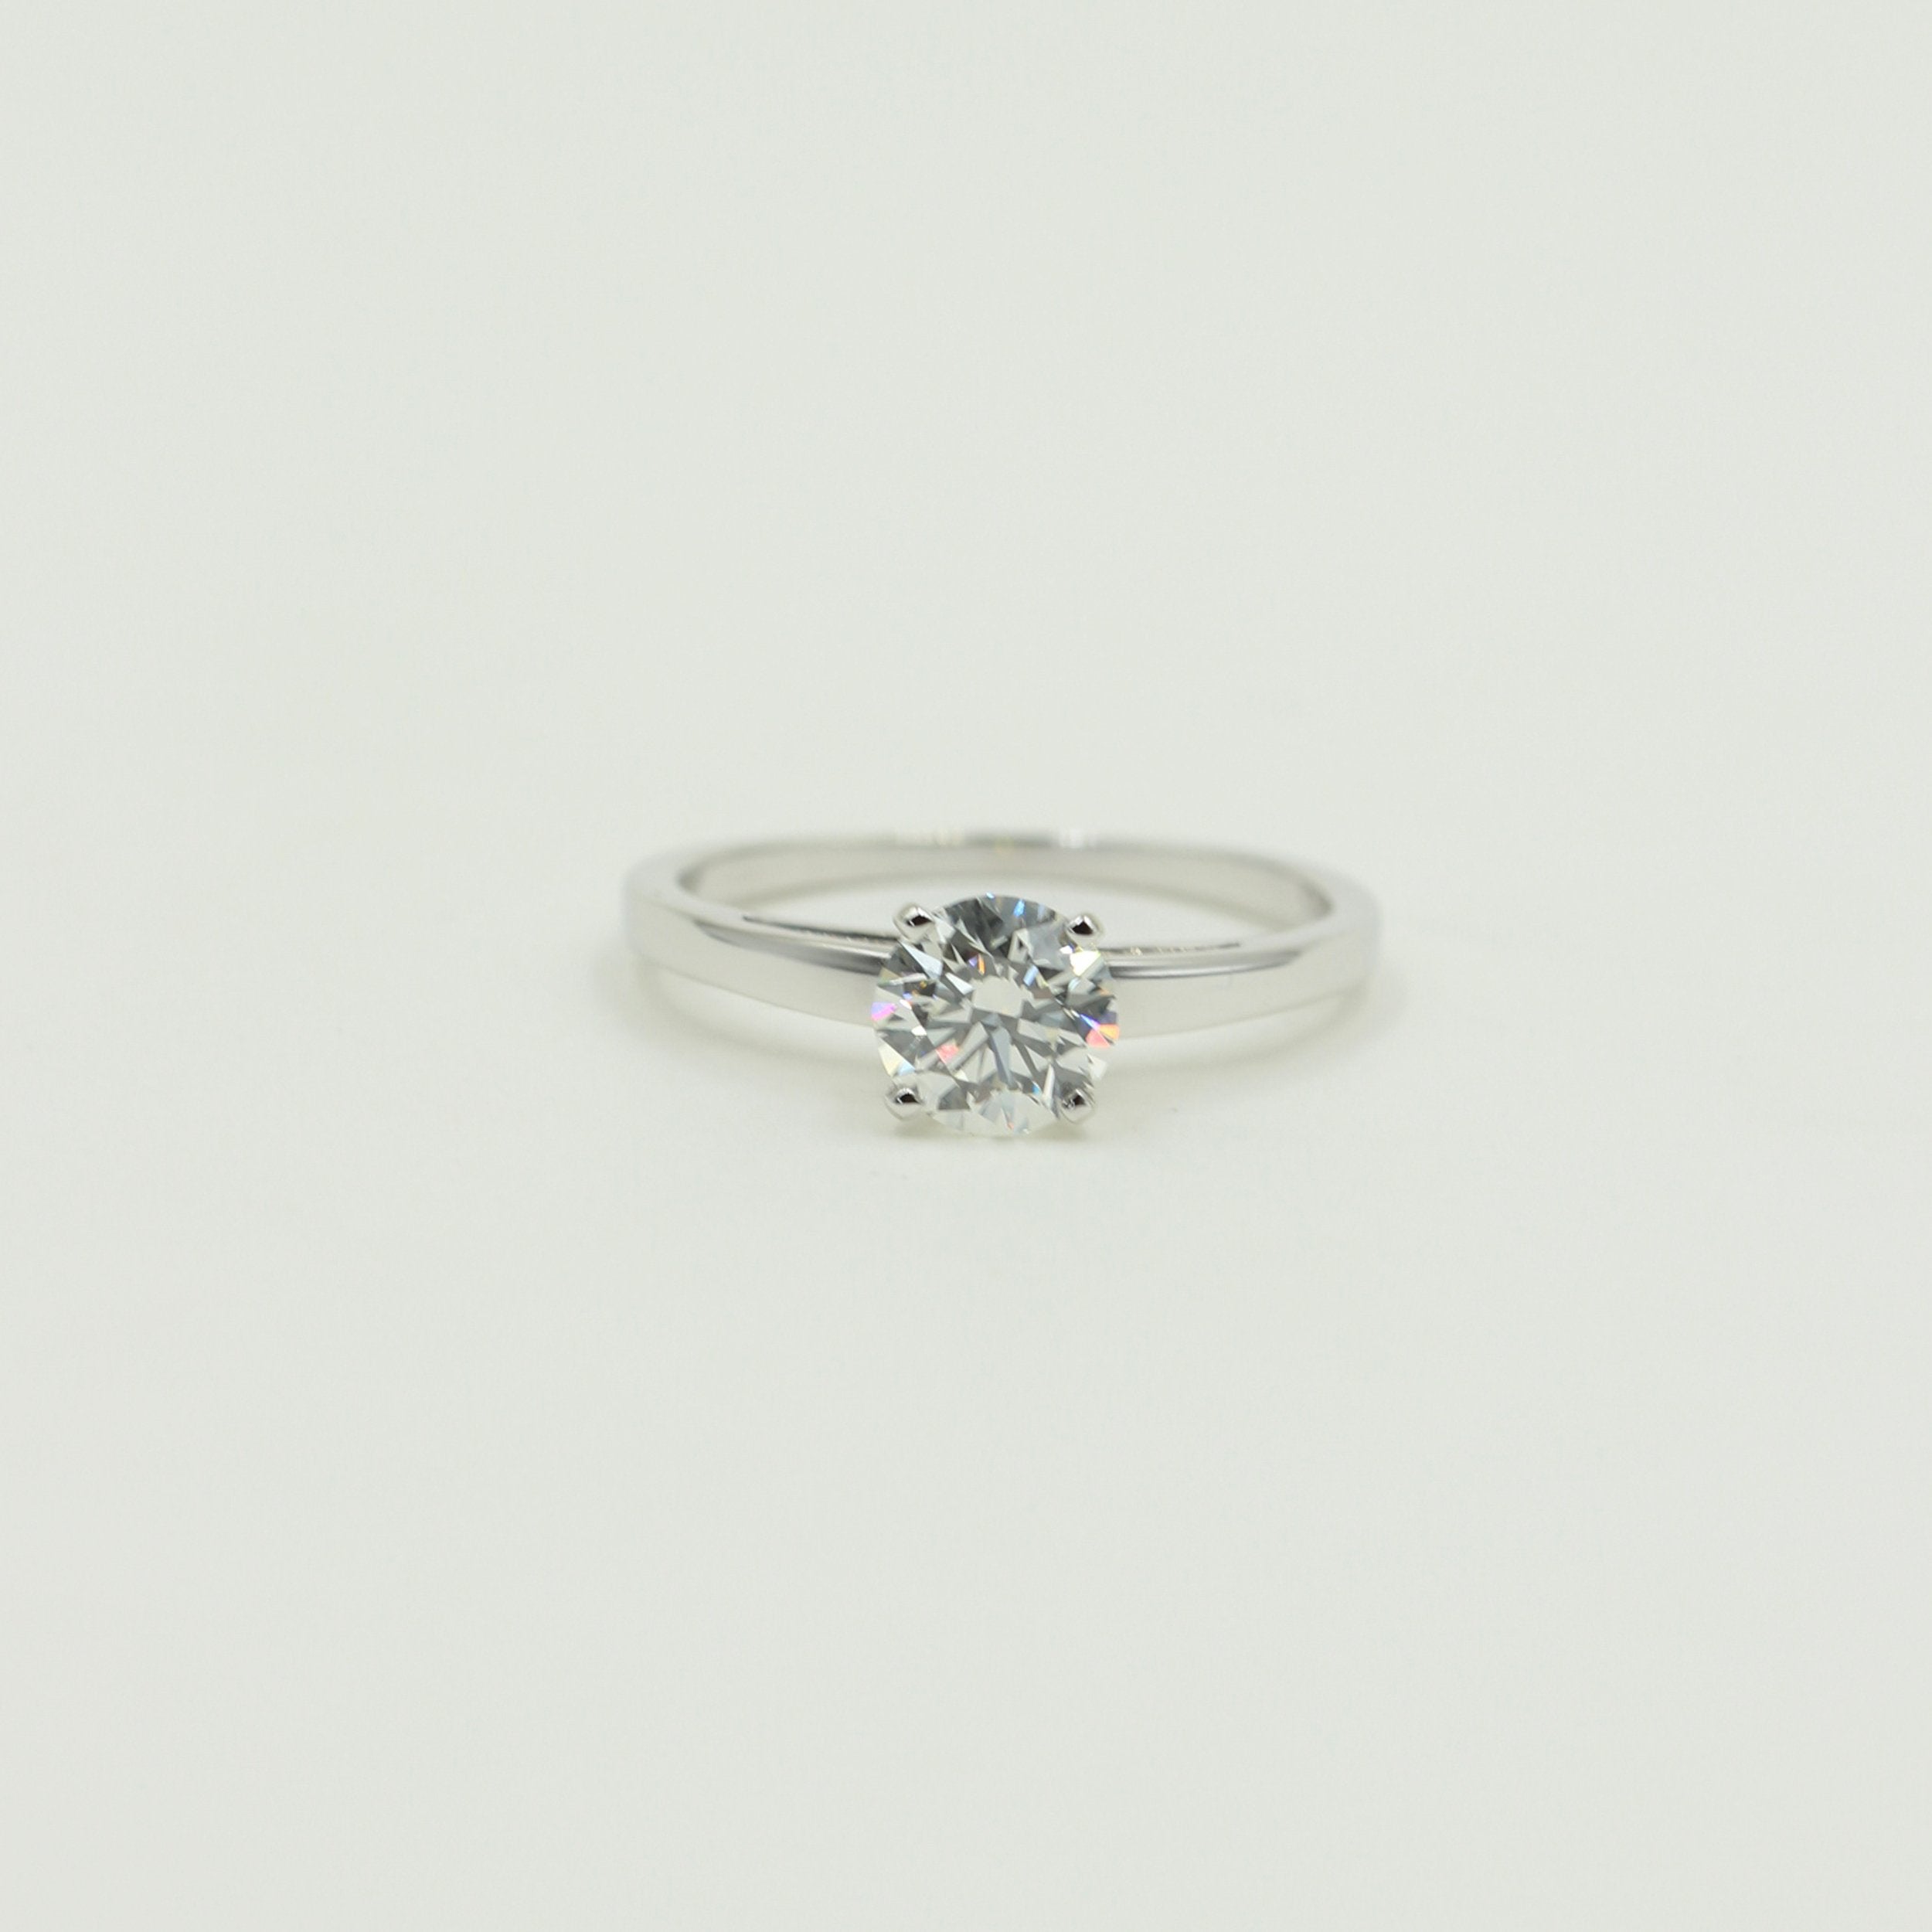 Solitairering m. 1,10 ct. G.VVS2